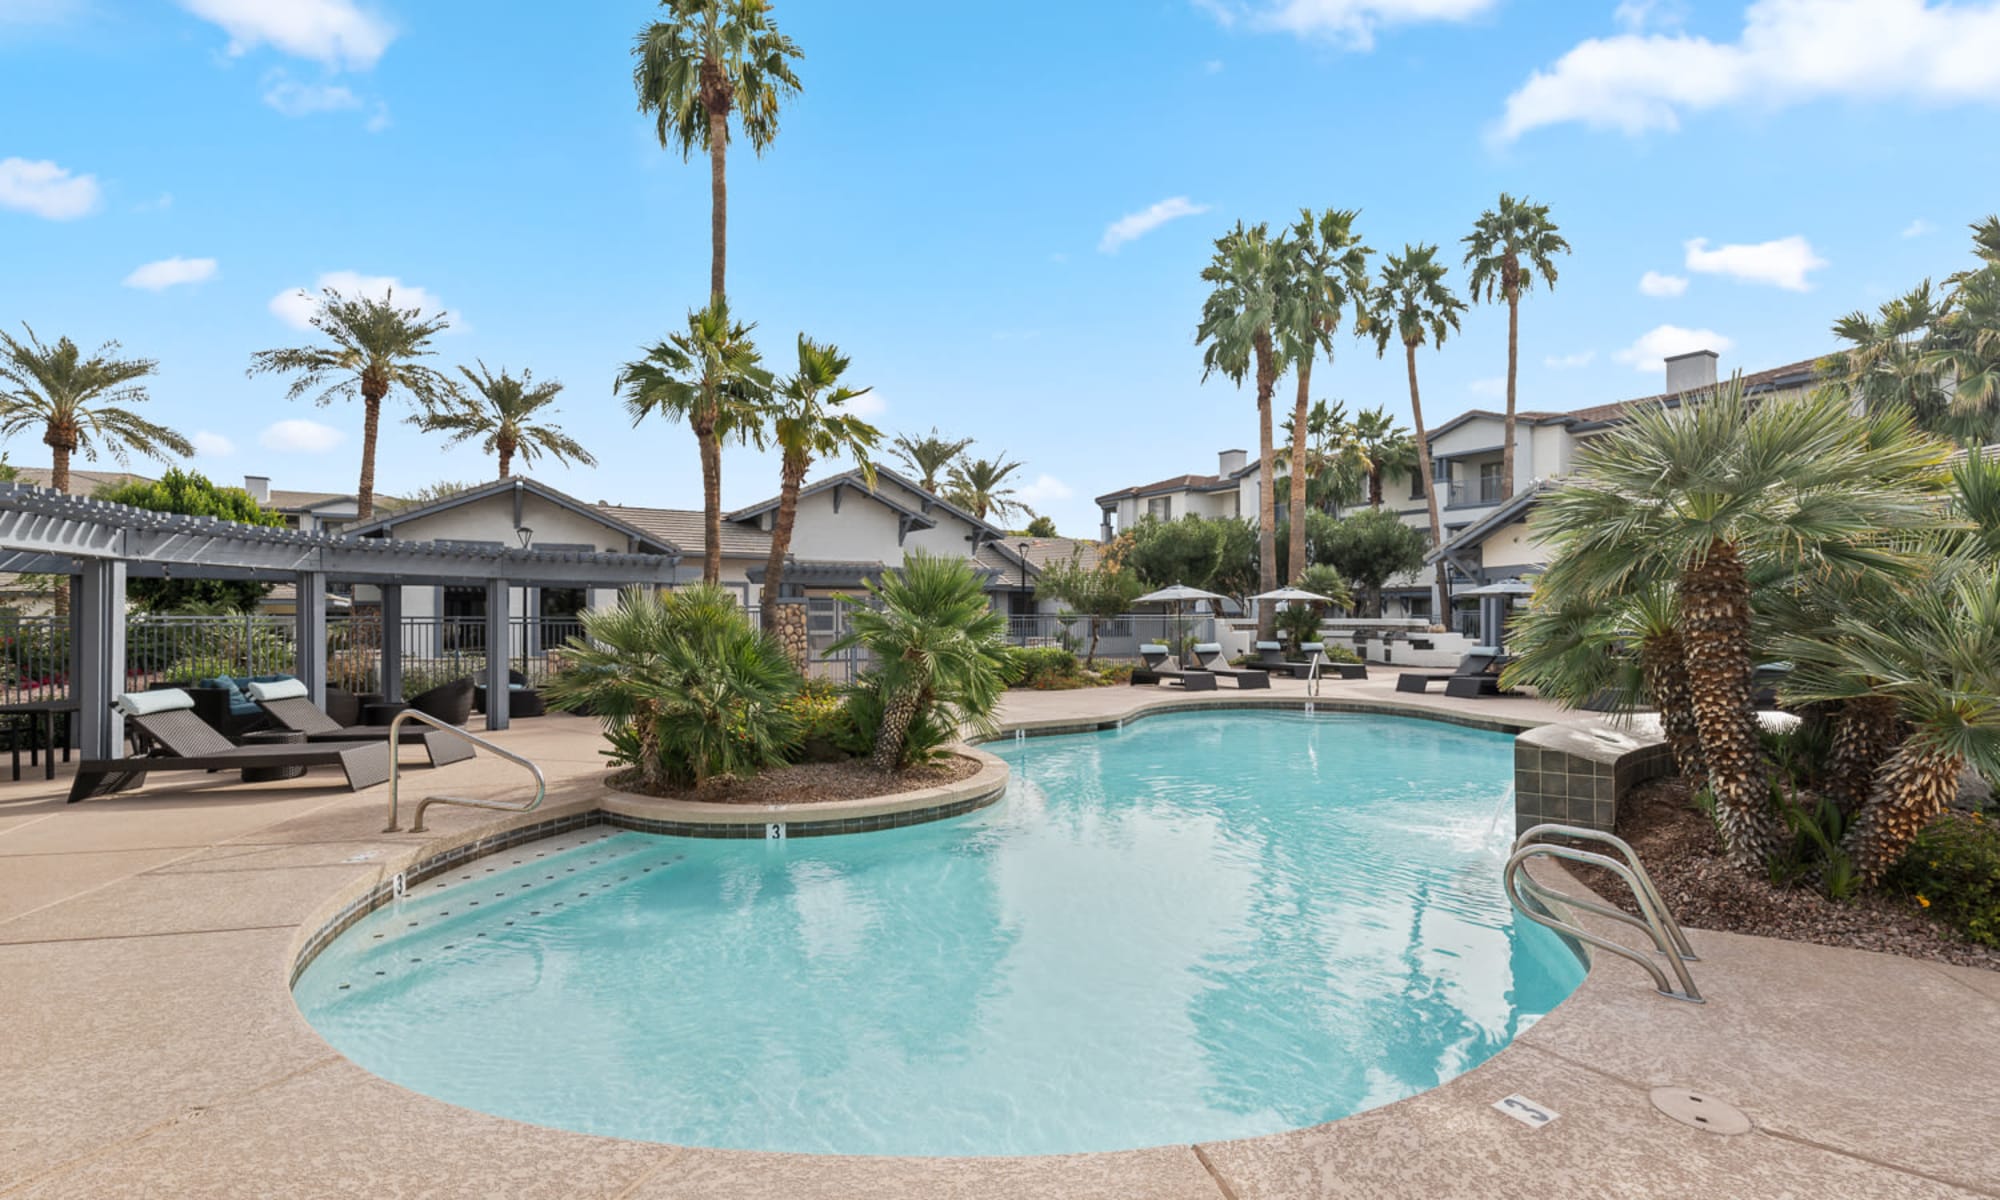 Azul at Spectrum offers Apartments with a Pool in Gilbert, Arizona